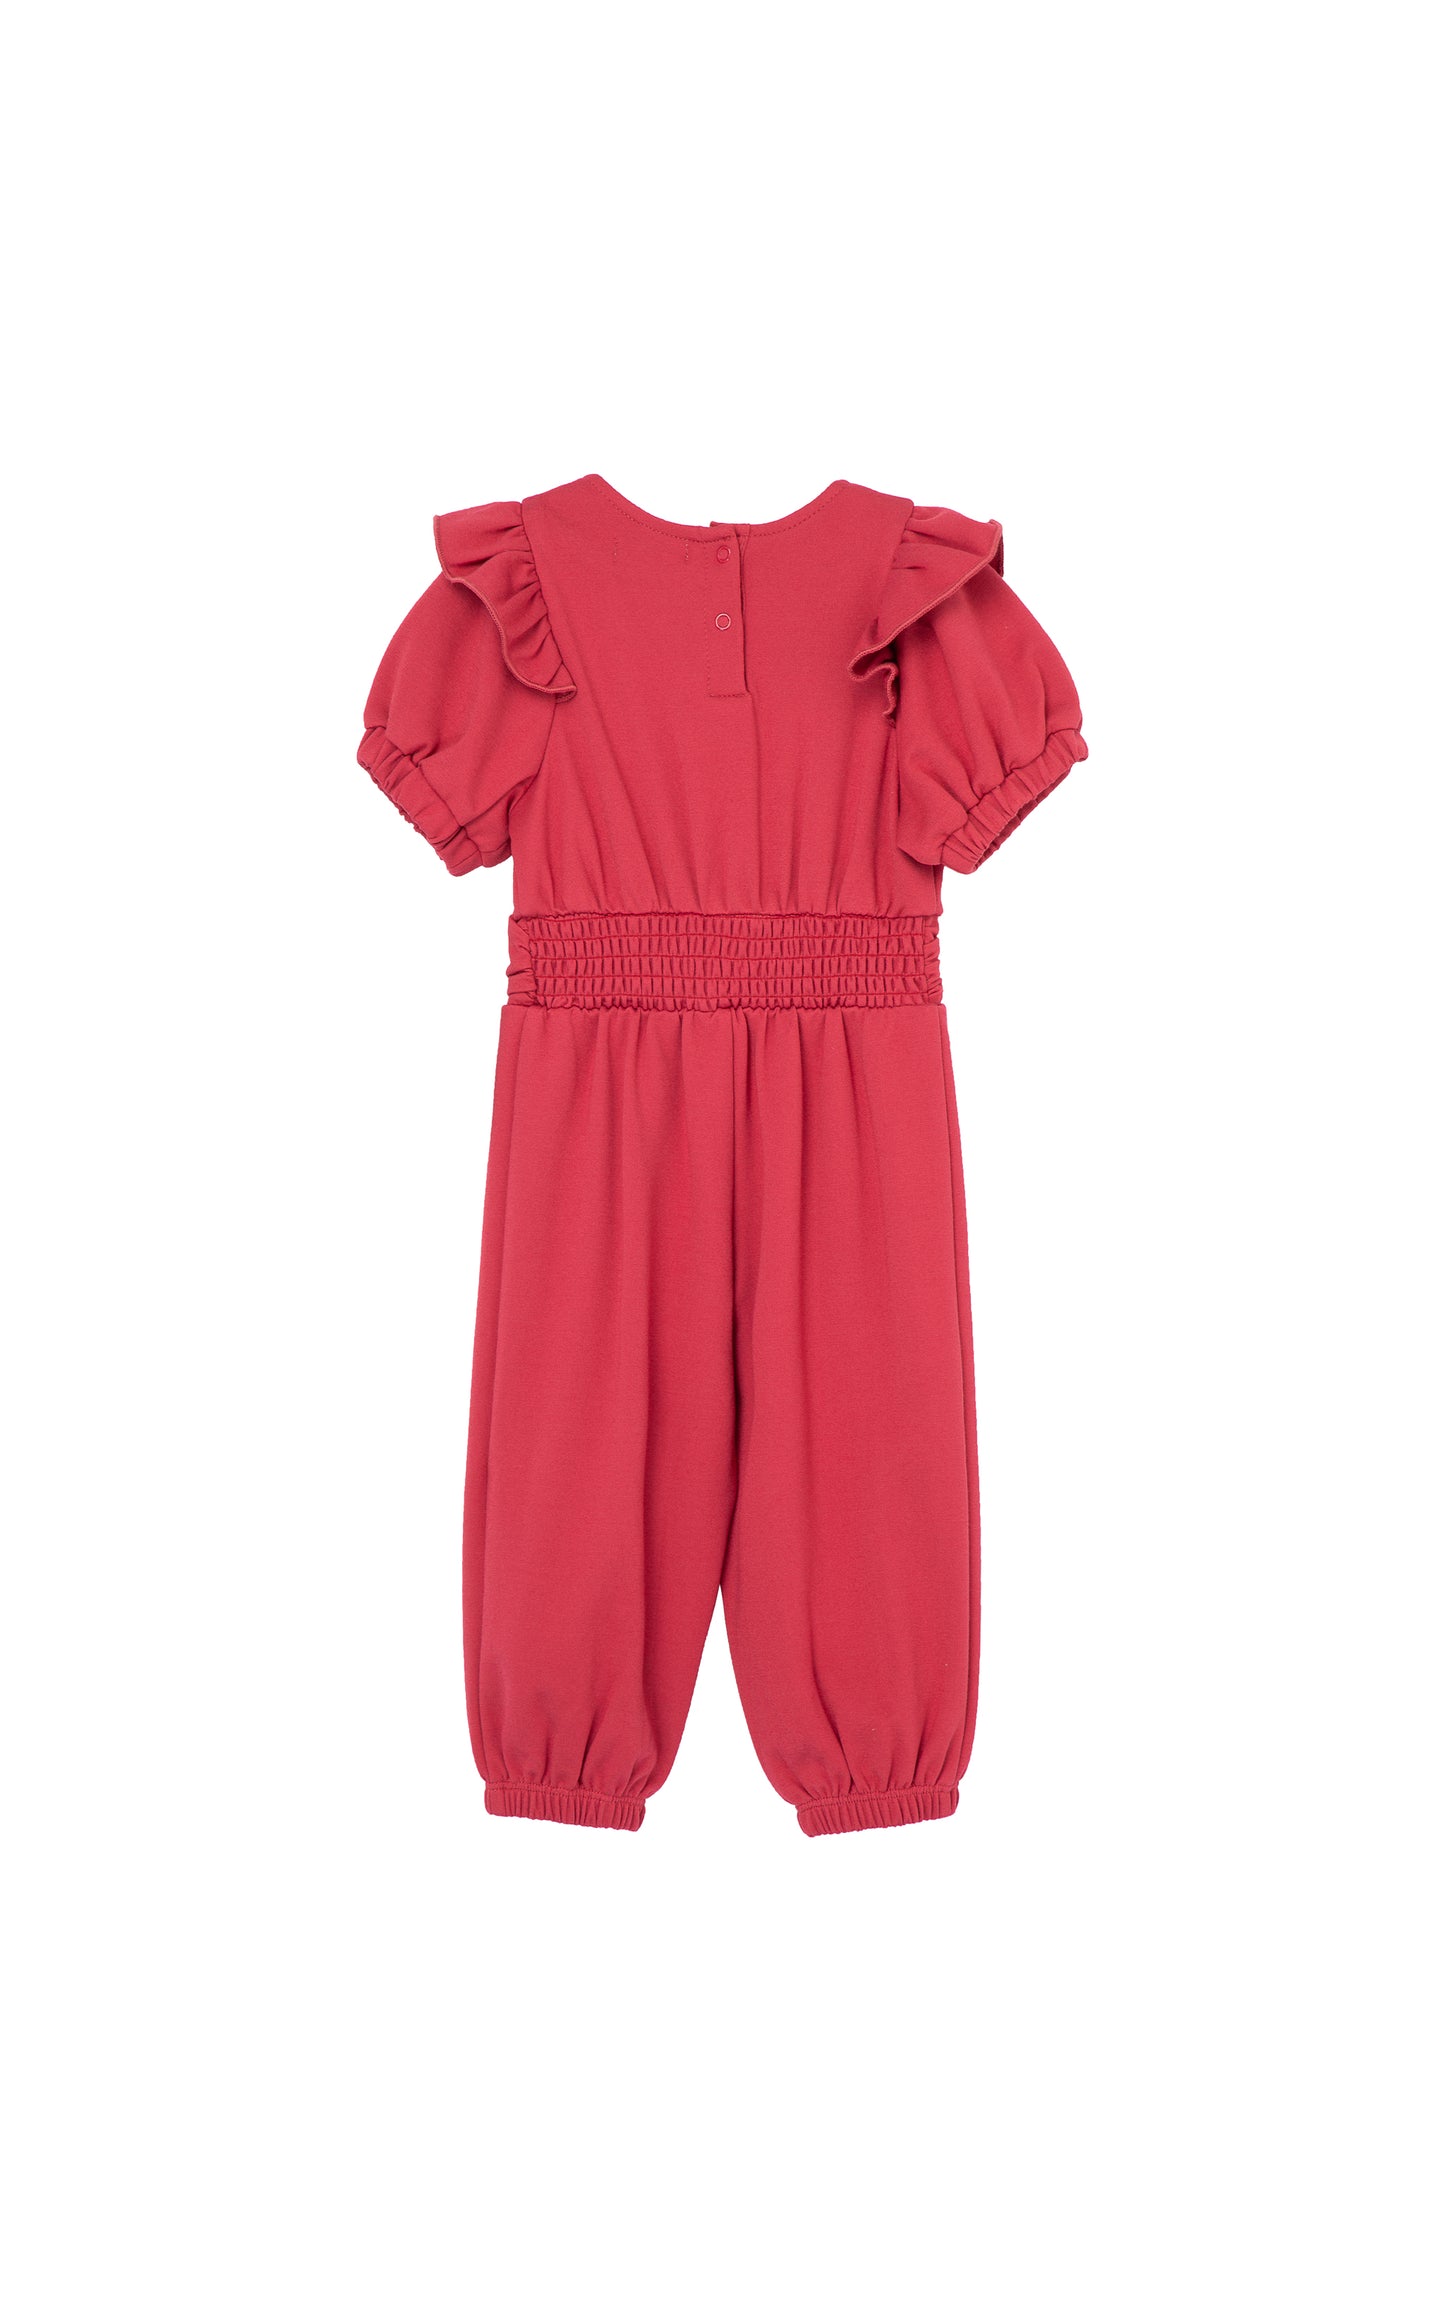 BACK OF RED SQUARE NECK PONTE KNIT JUMPSUIT ONESIE  WITH GATHERING AT THE FRONT